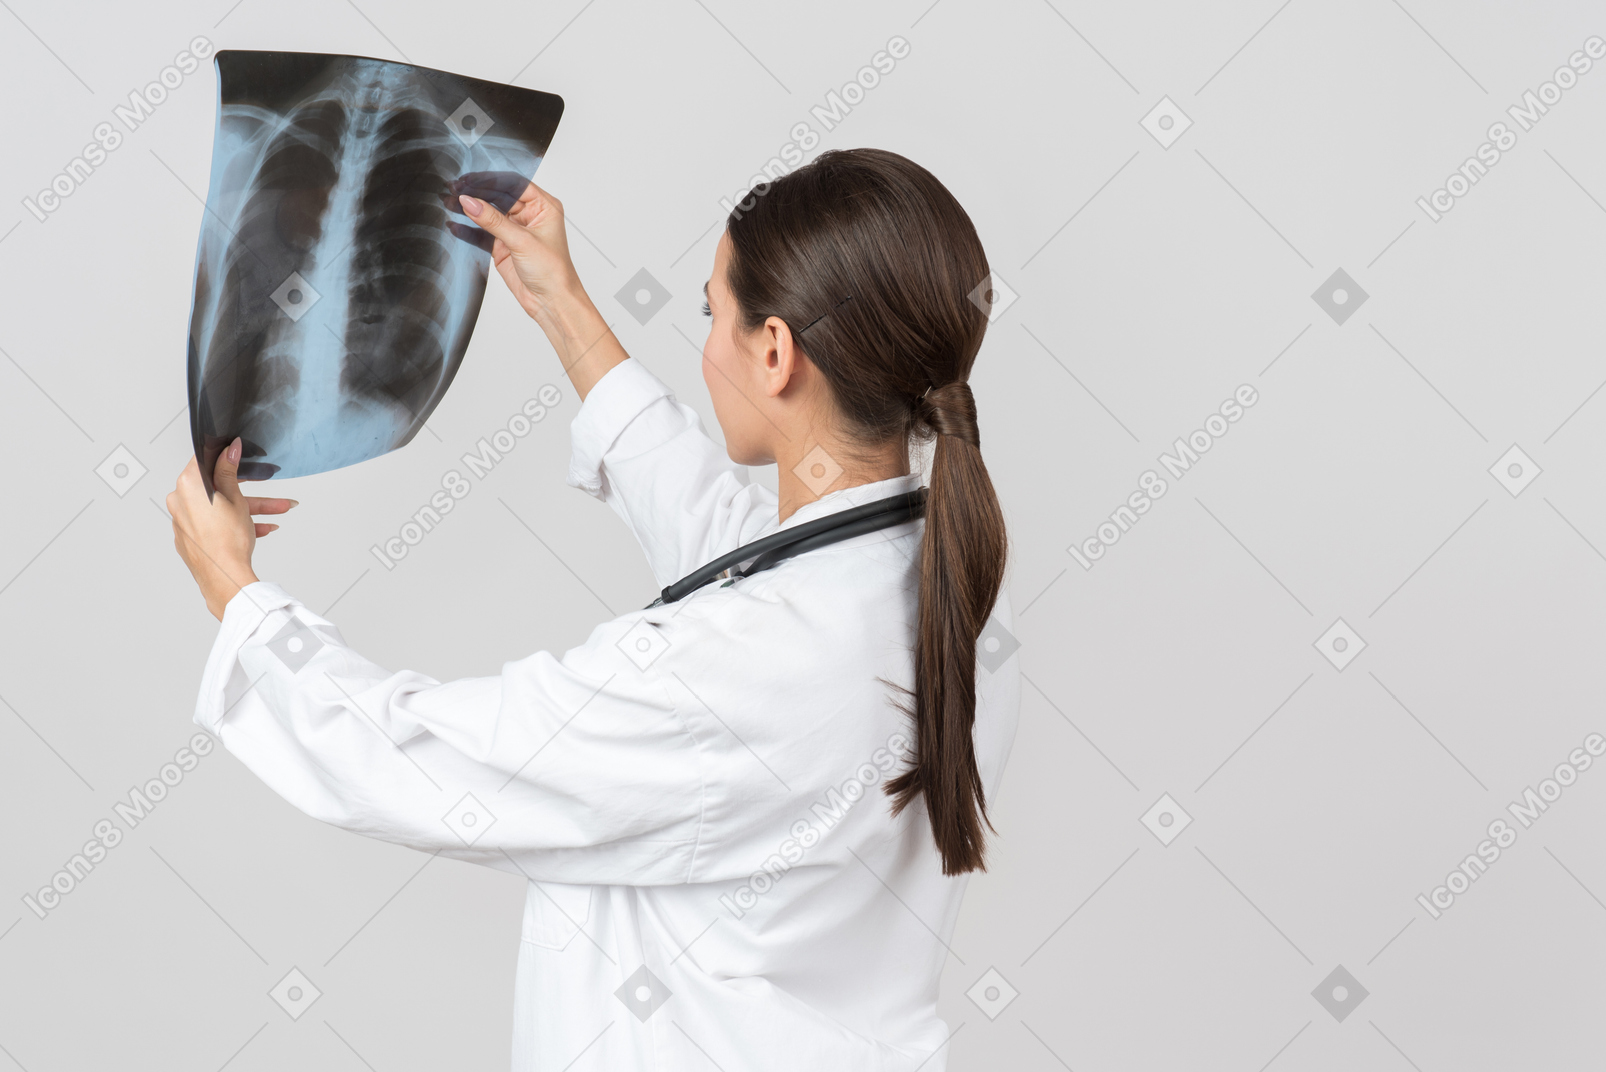 Young female doctor looking attentively on x-ray photograph